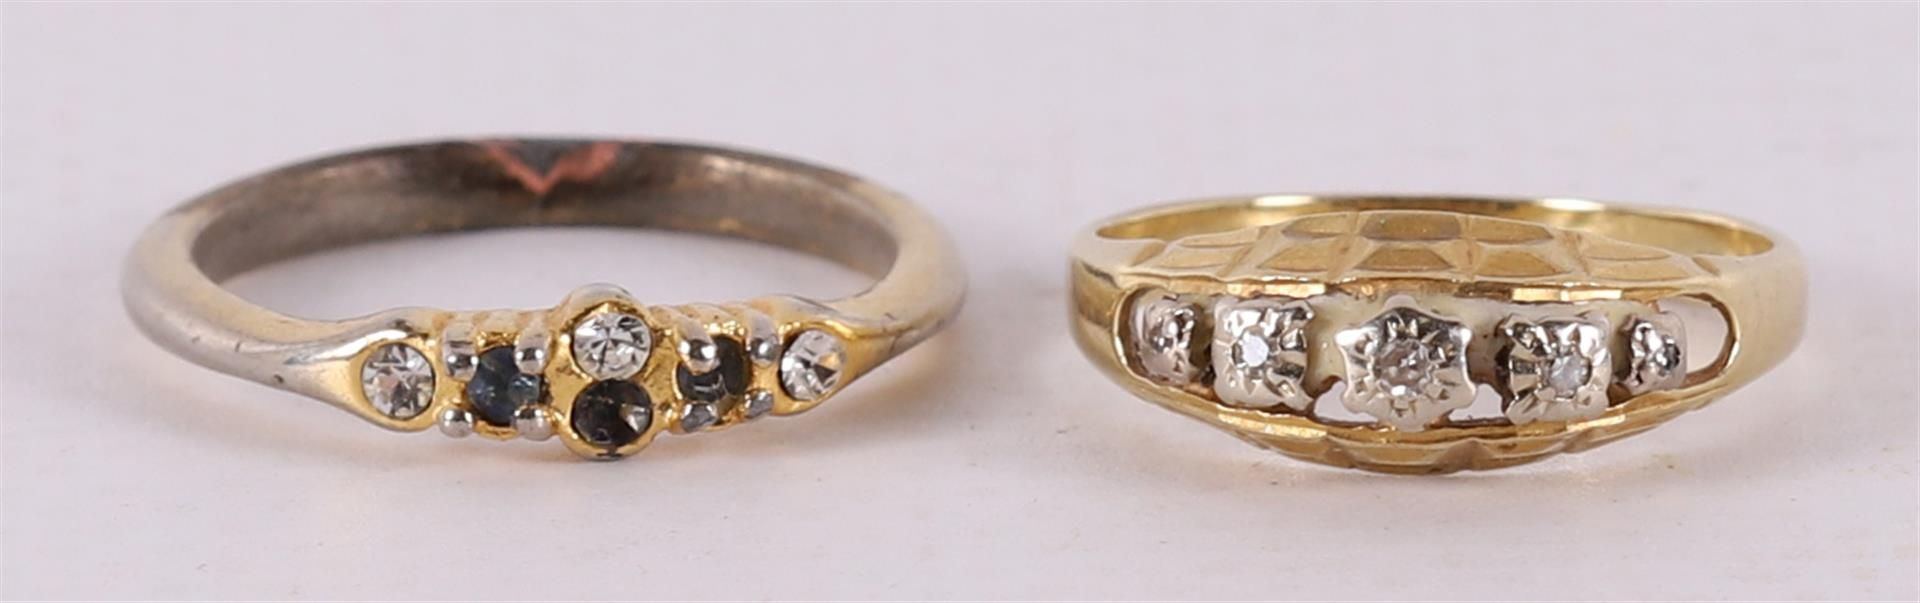 A 14 kt yellow gold ring set with five brilliant cut diamonds,